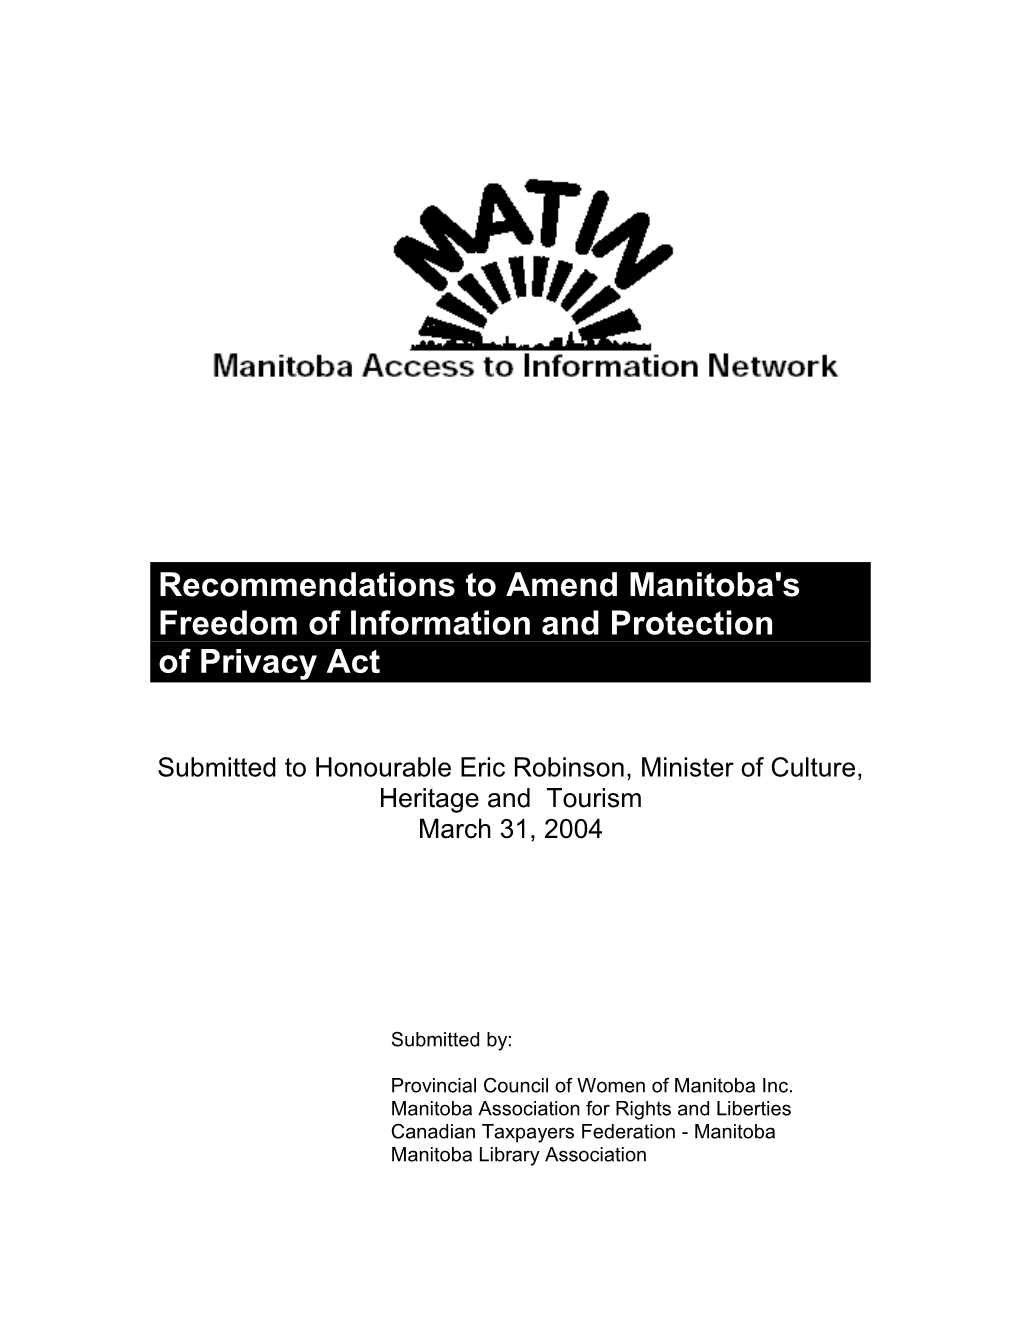 Recommendations to Amend Manitoba's Freedom of Information and Protection